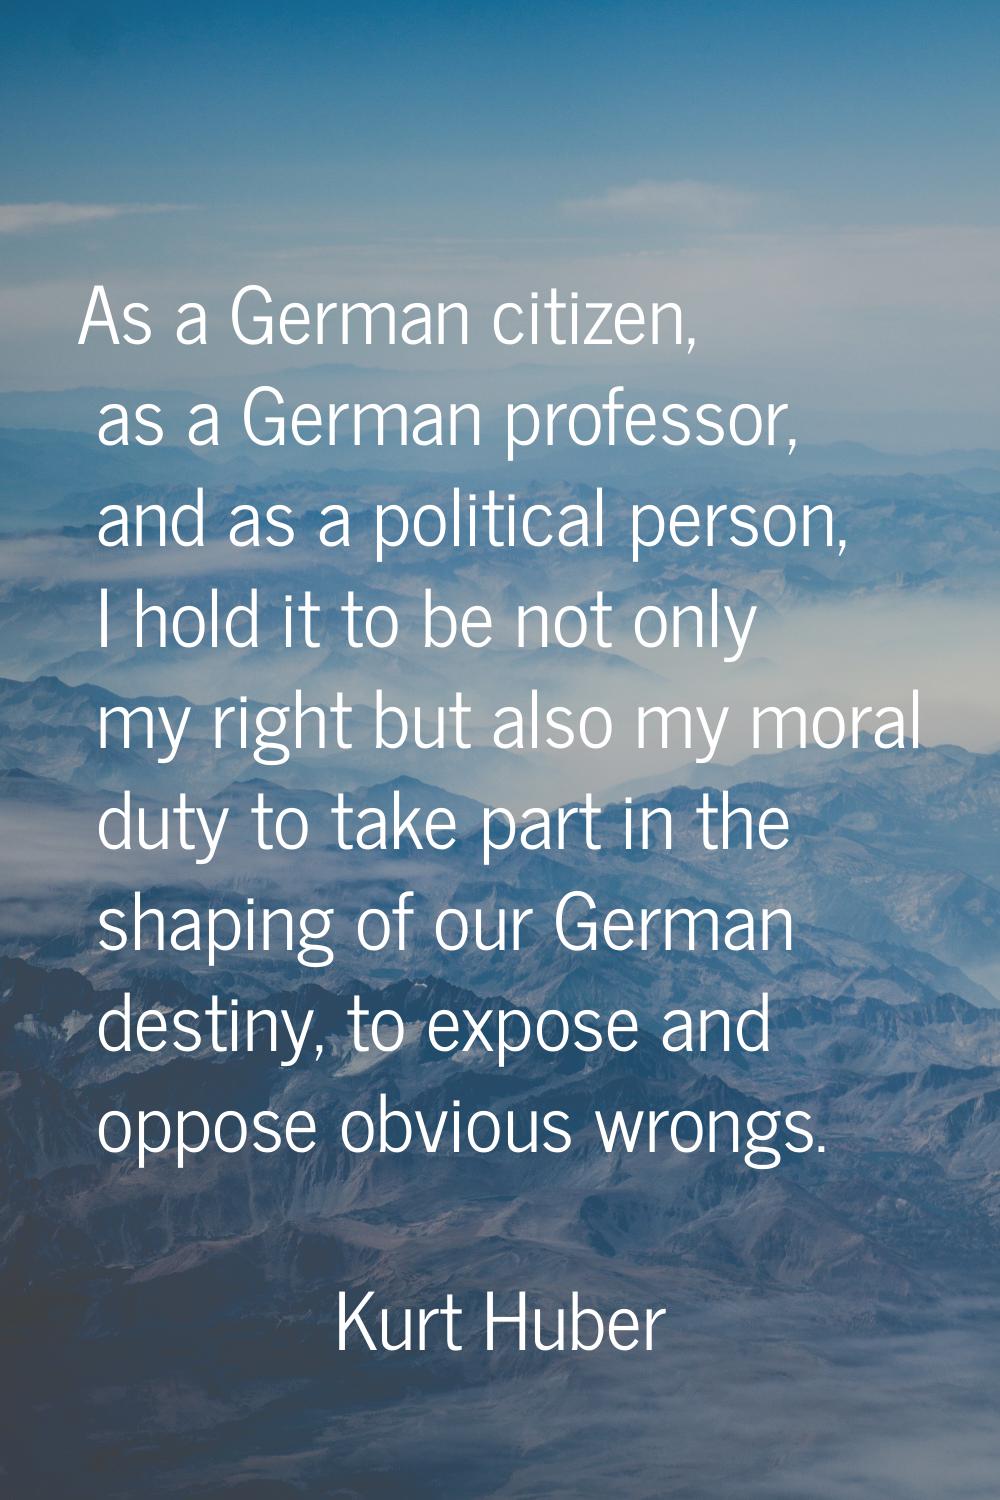 As a German citizen, as a German professor, and as a political person, I hold it to be not only my 